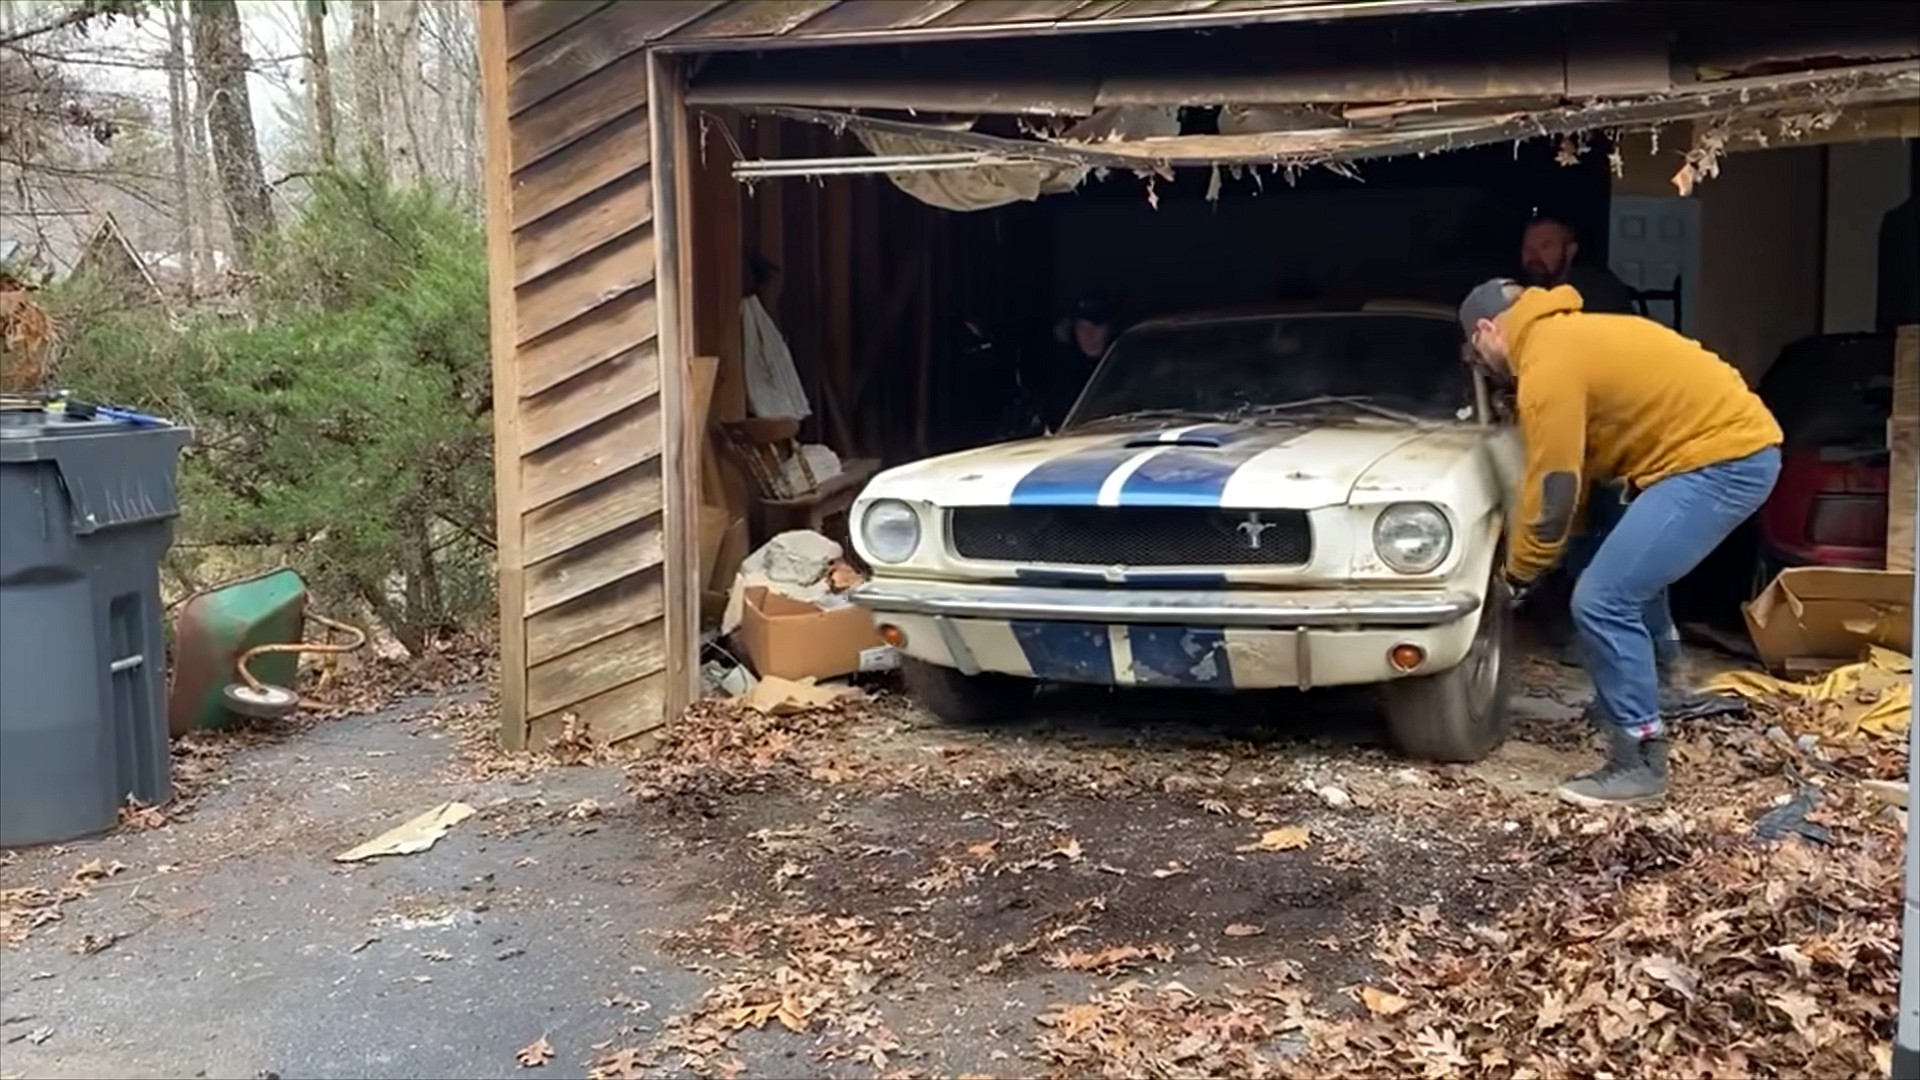 barn find gold 1965 shelby mustang gt350 stored for decades in abandoned house 7